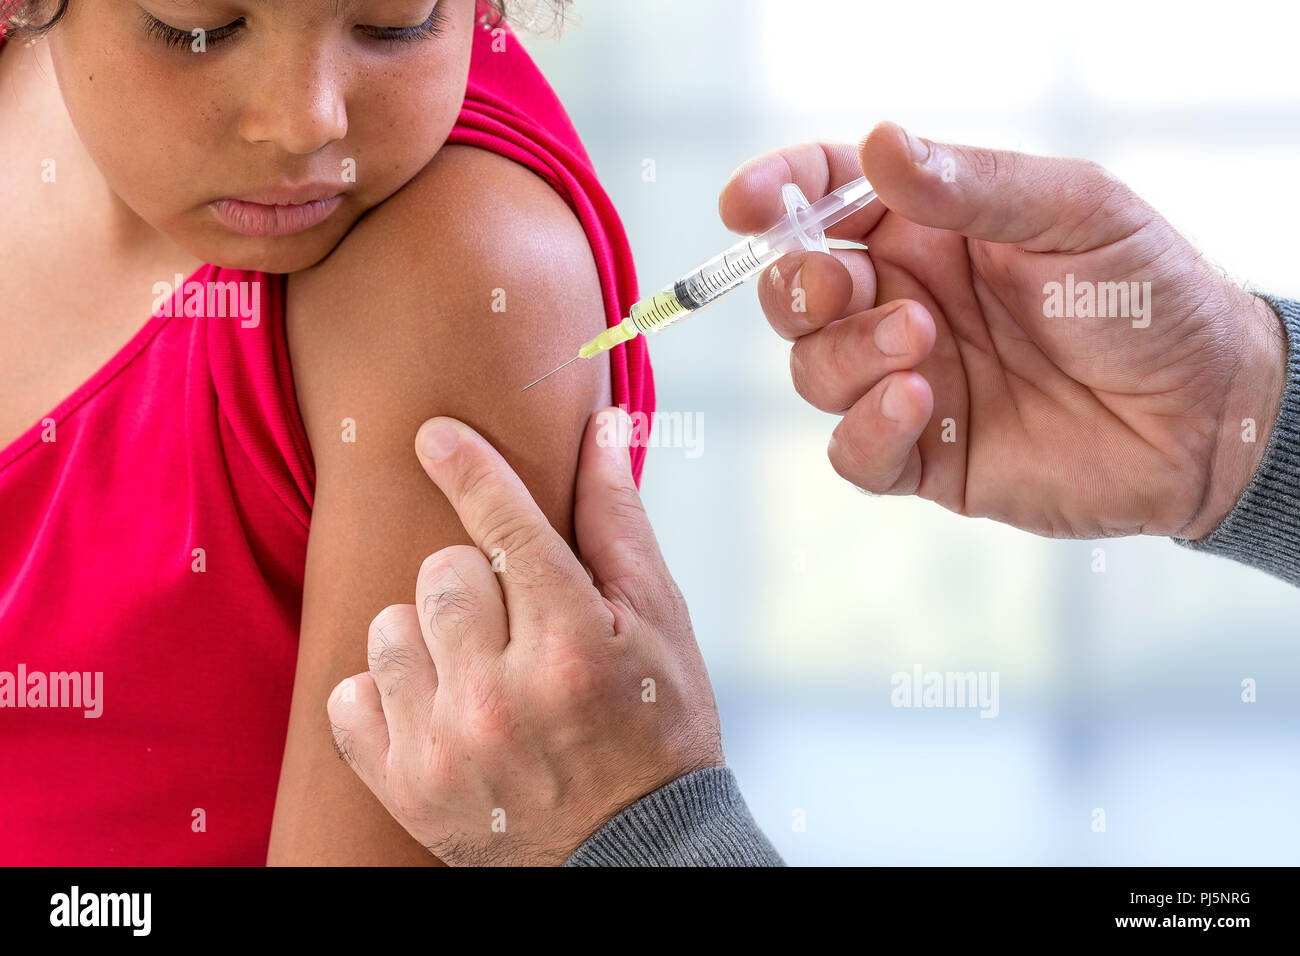 Vaccination. Young boy receiving vaccination immunisation by professional health worker, focus on shoulder Stock Photo